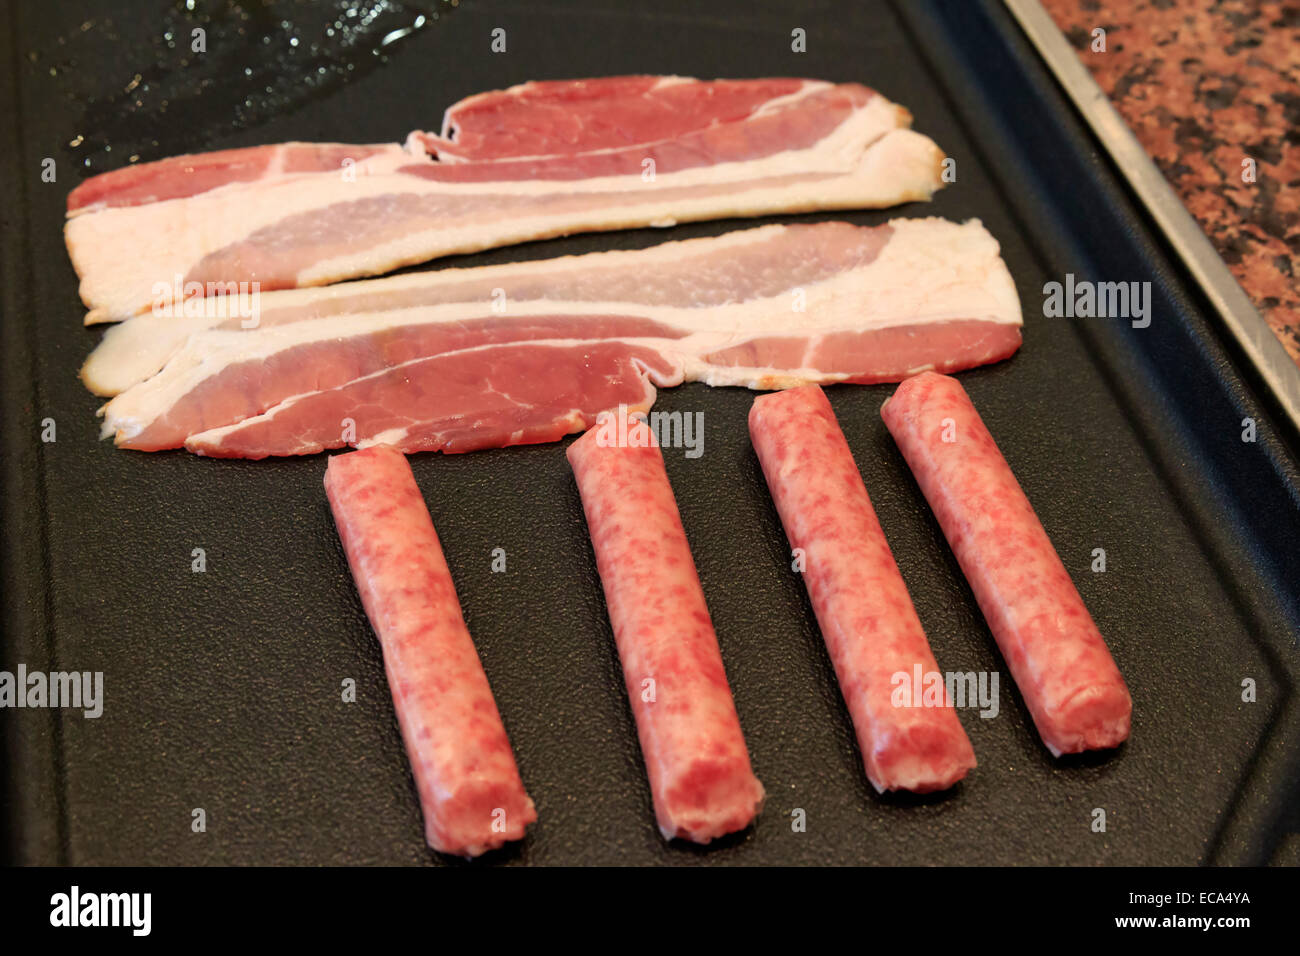 Bacon and sausage on a griddle Stock Photo